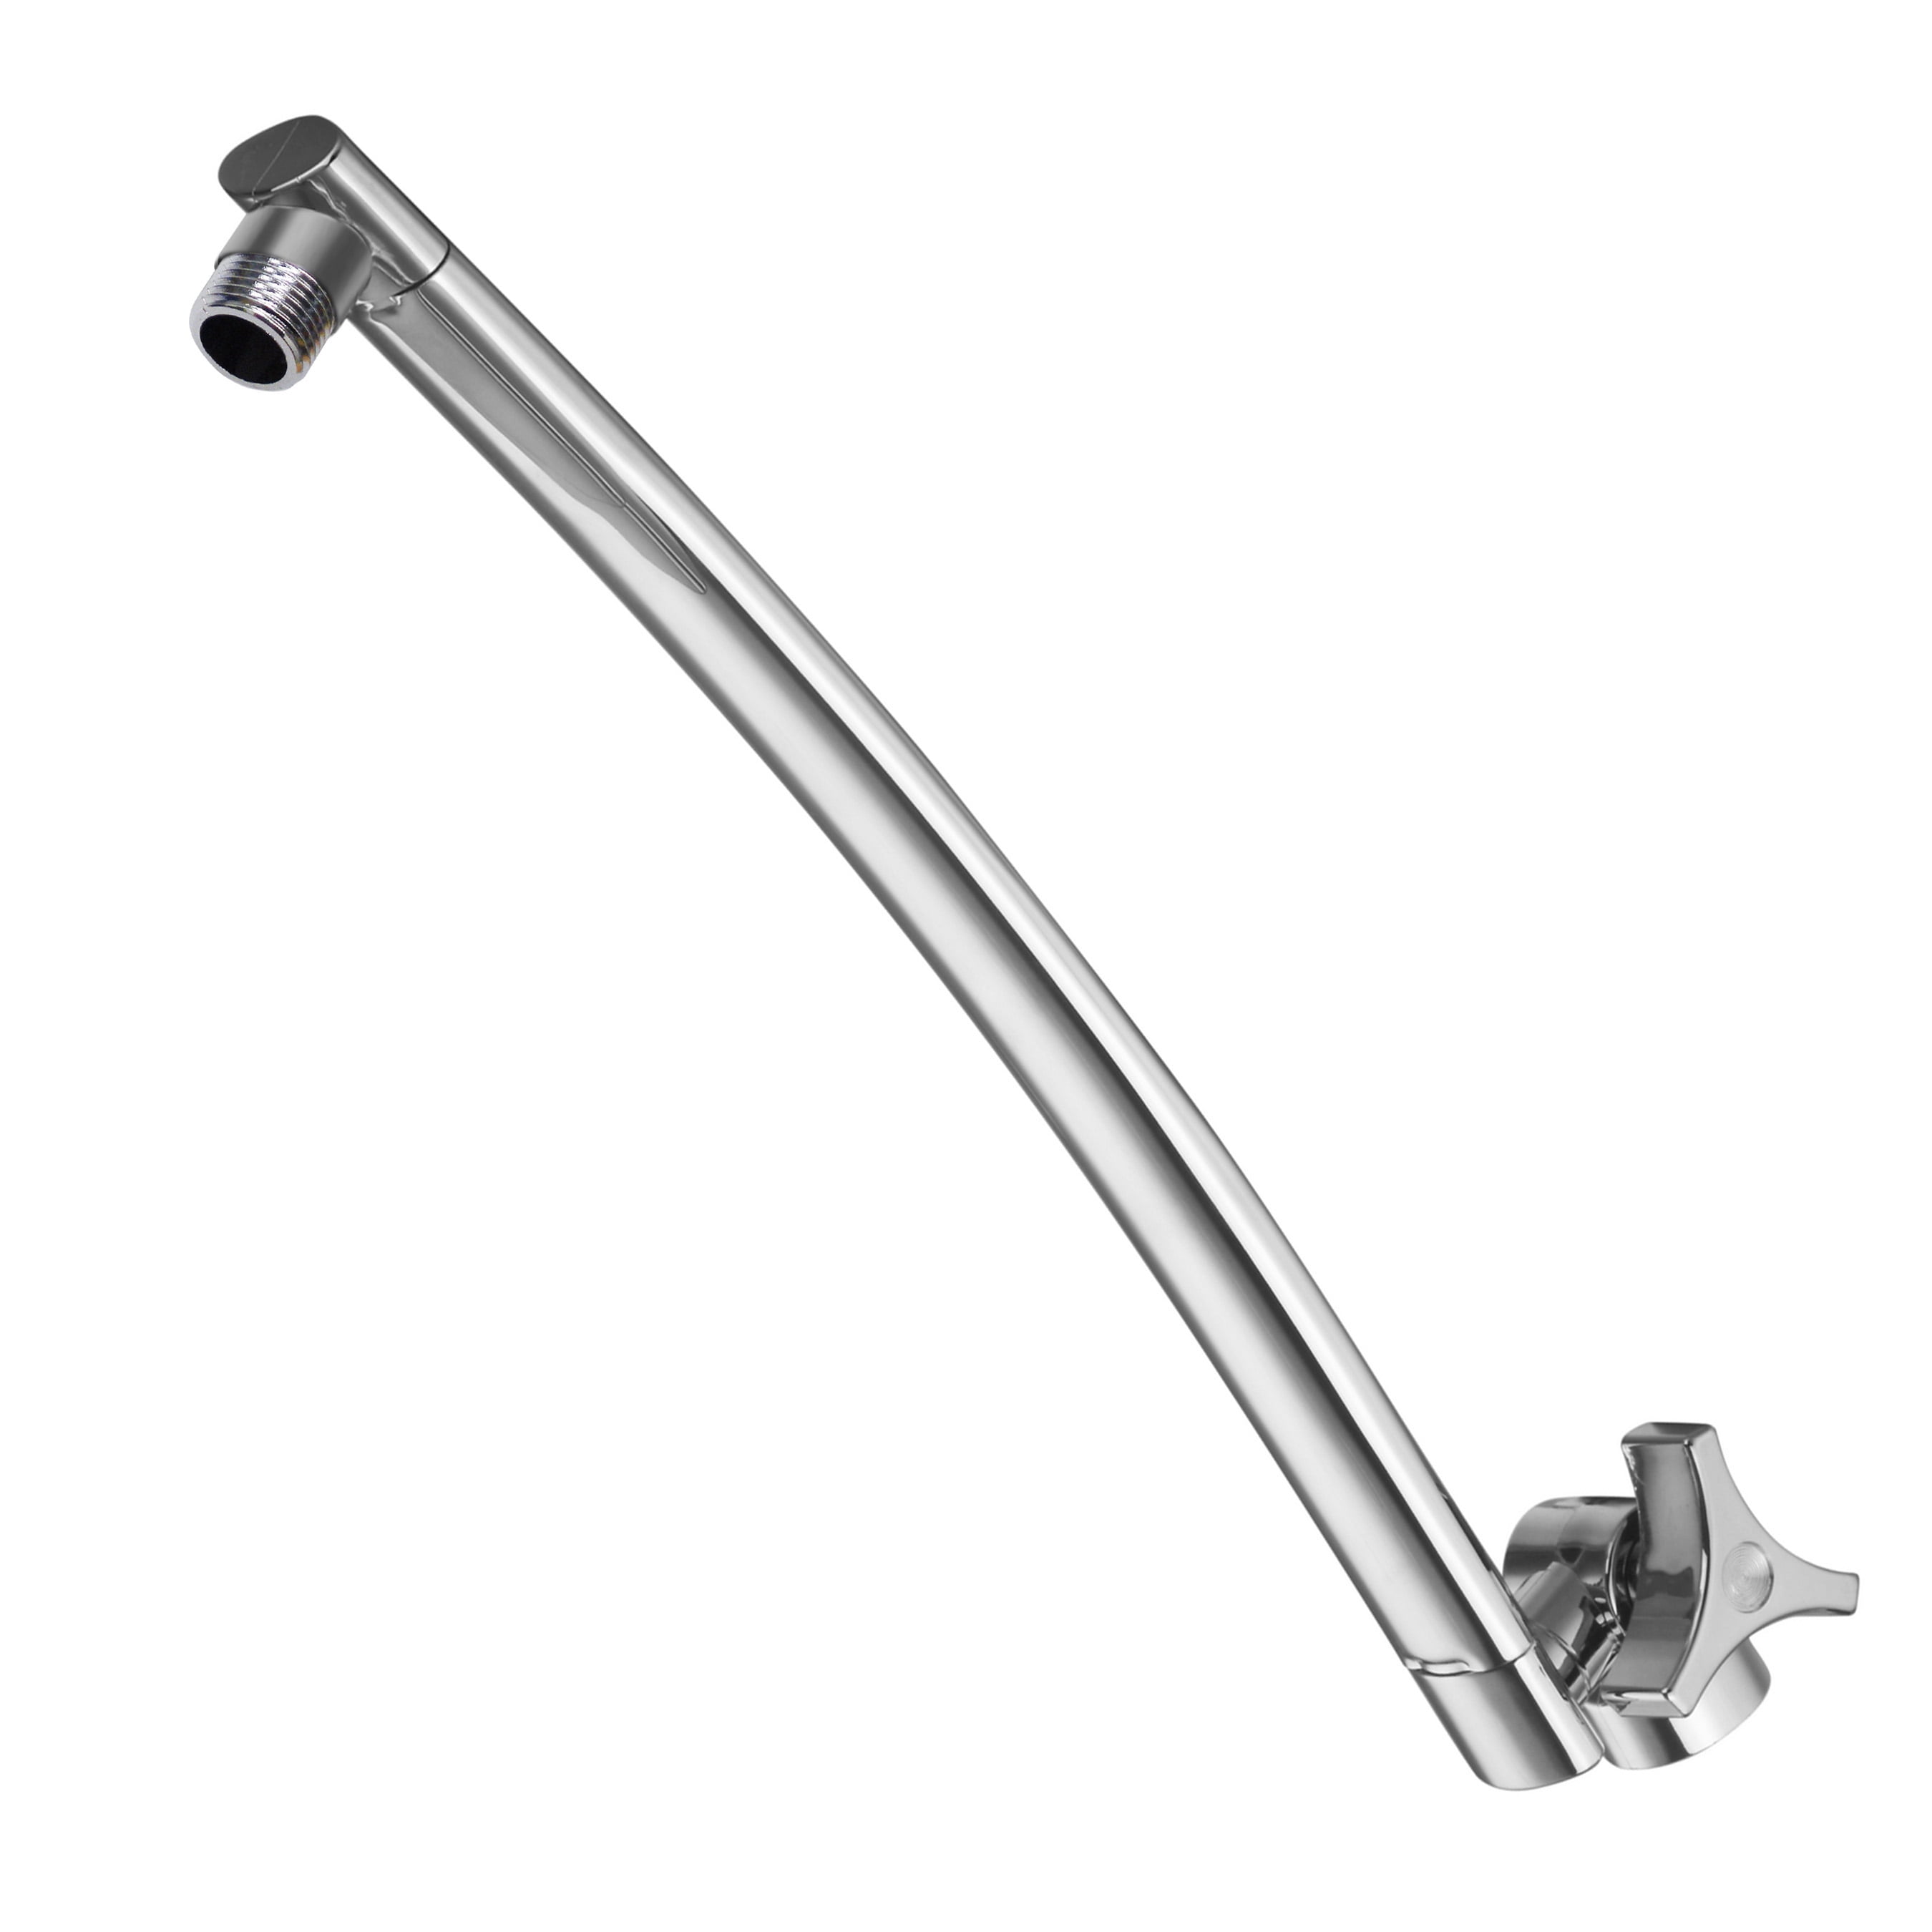 L... Hotel Spa 11" Solid Brass Adjustable Shower Extension Arm with Lock Joints 